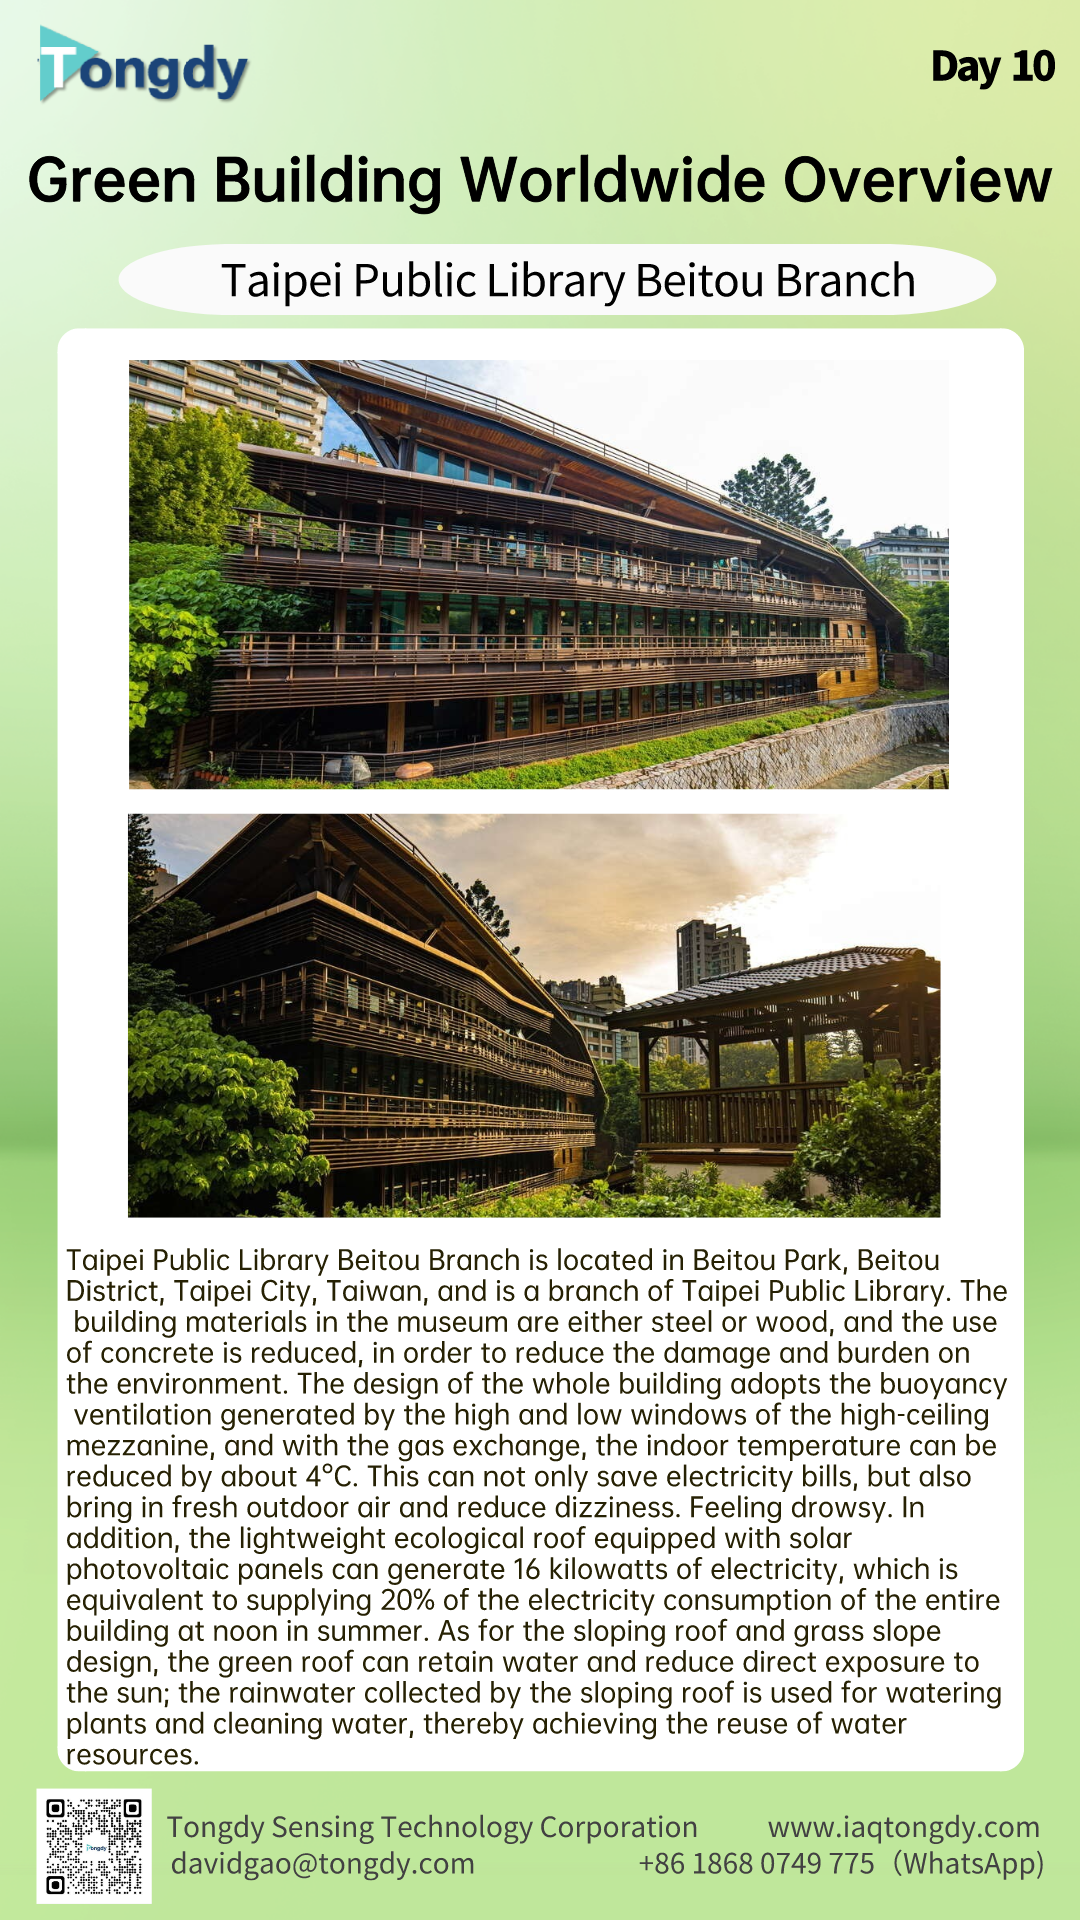 Green Building World Overview——Taipei Public Library Beitou Branch